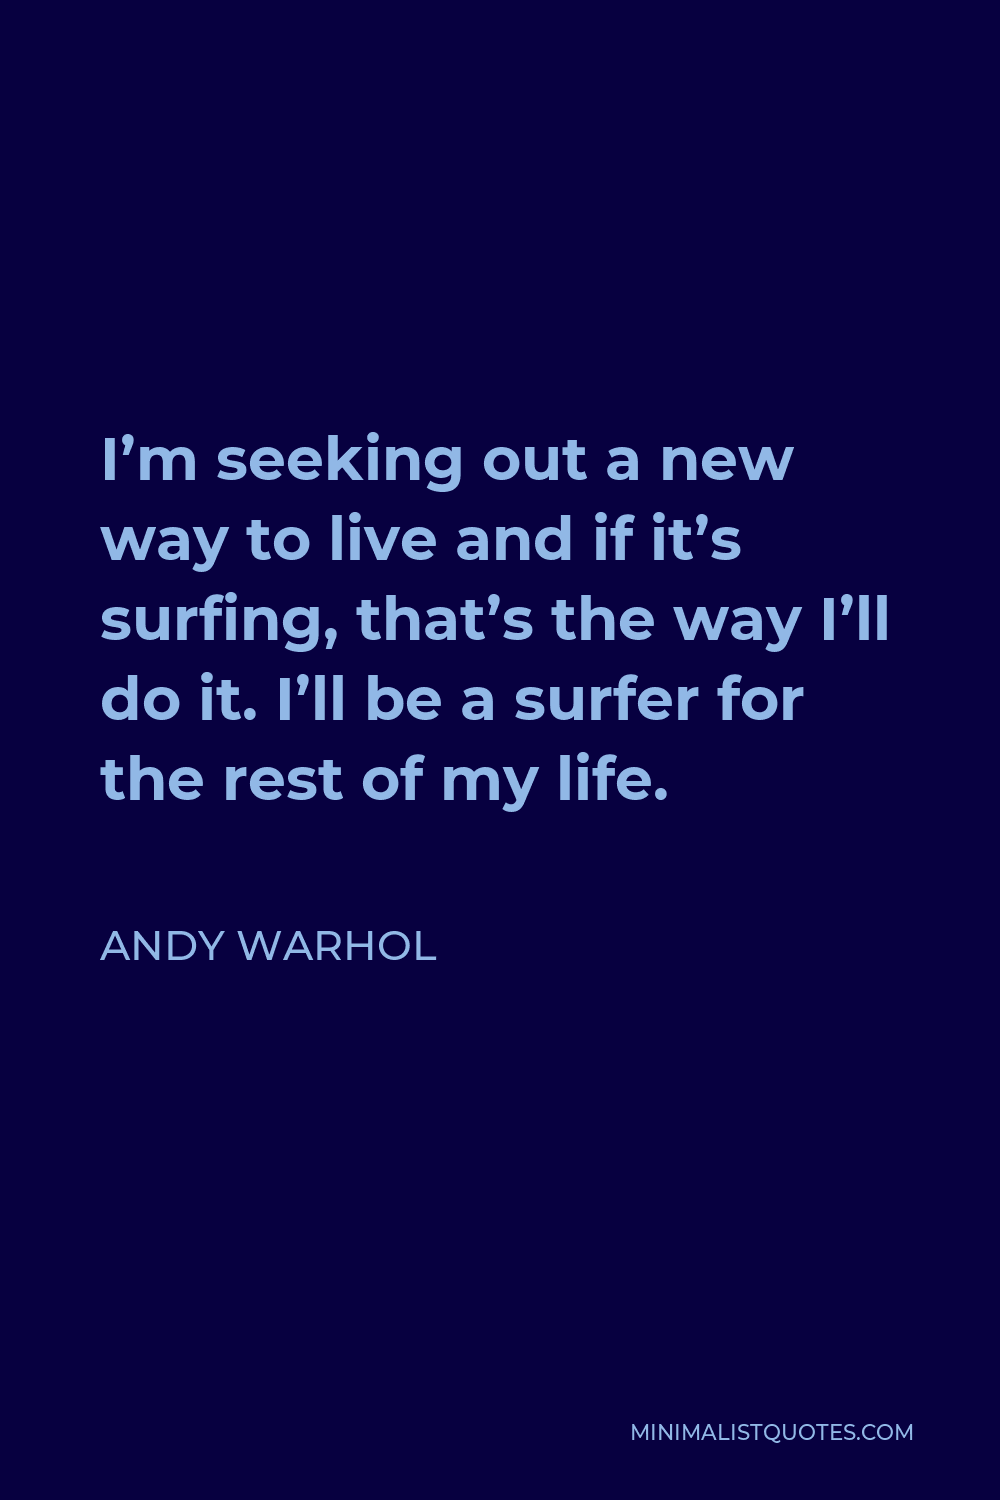 Andy Warhol Quote - I’m seeking out a new way to live and if it’s surfing, that’s the way I’ll do it. I’ll be a surfer for the rest of my life.